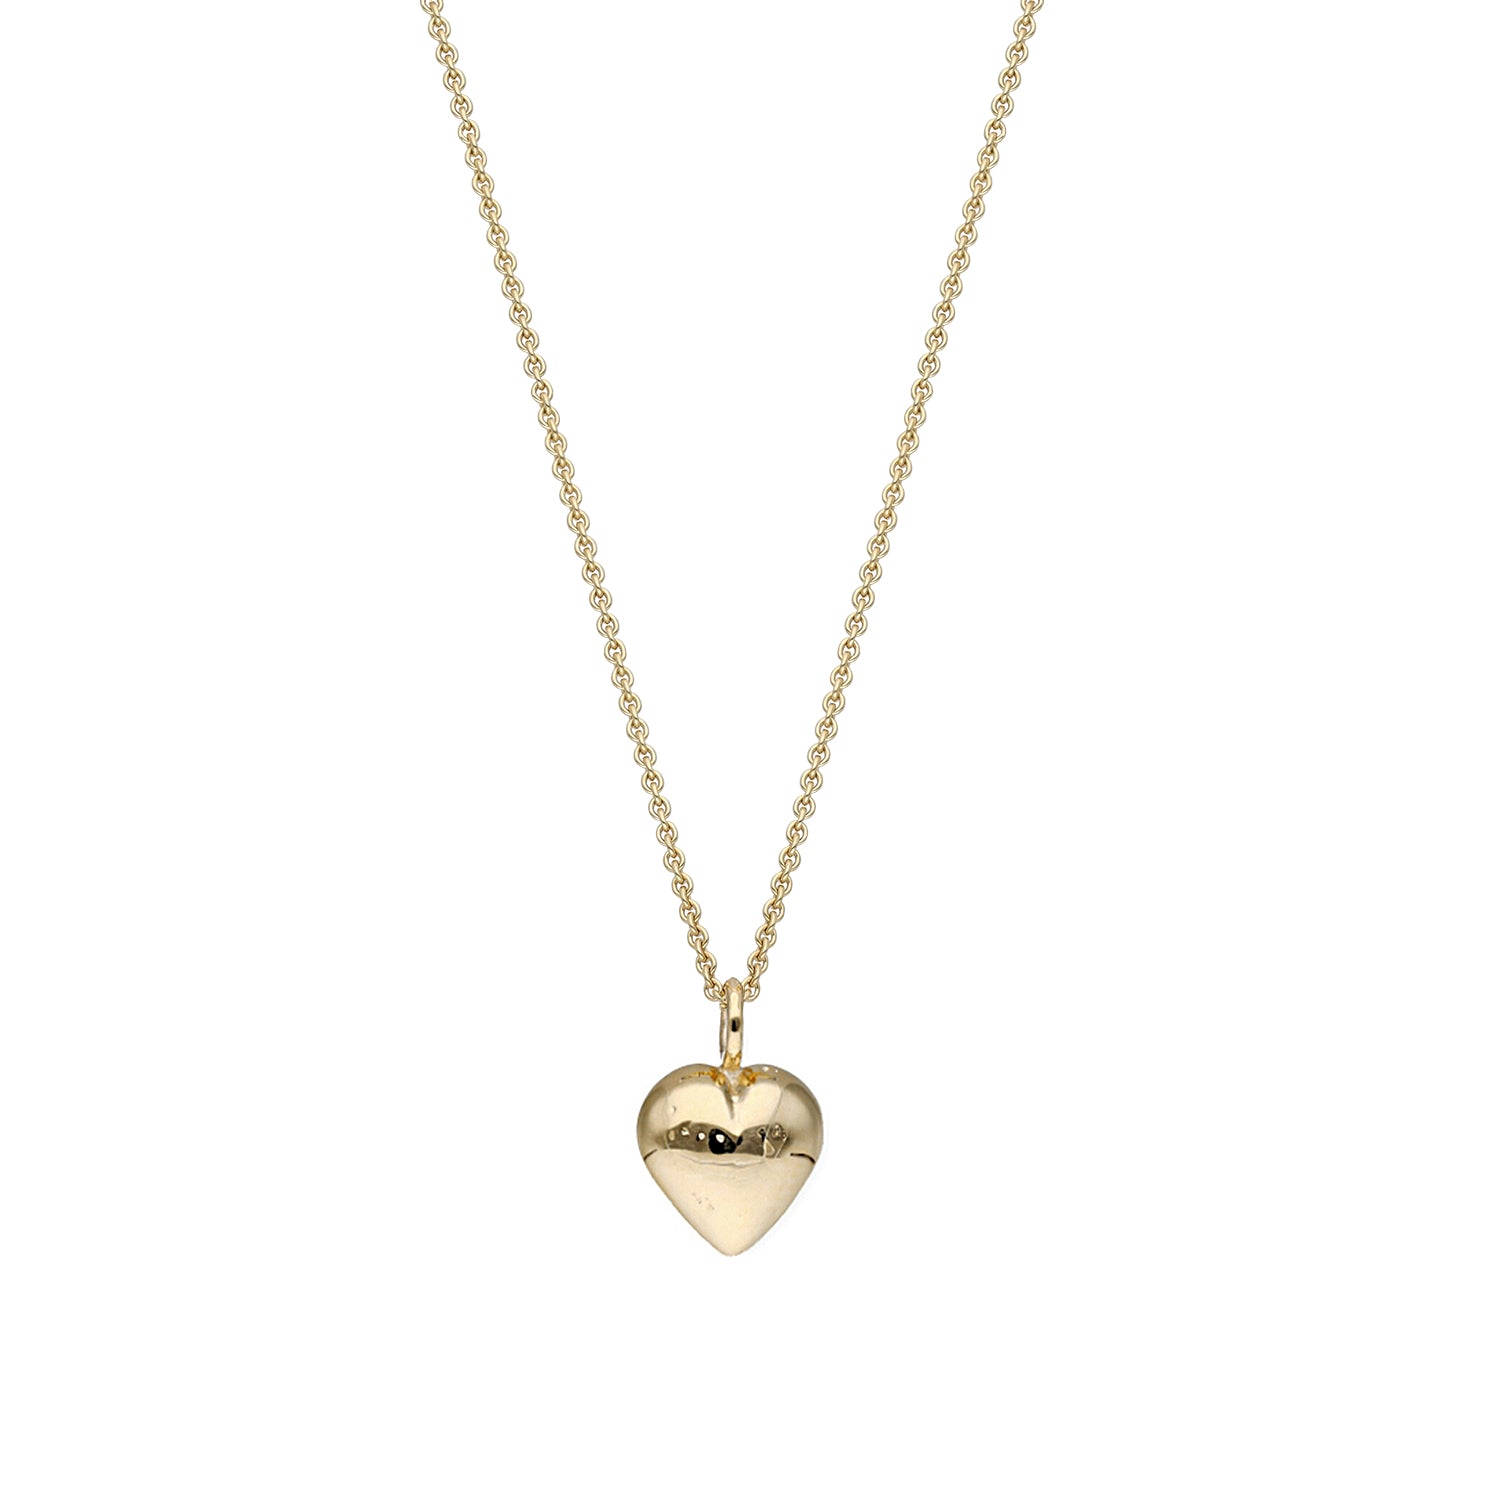 Solid gold heart necklace made in Ireland